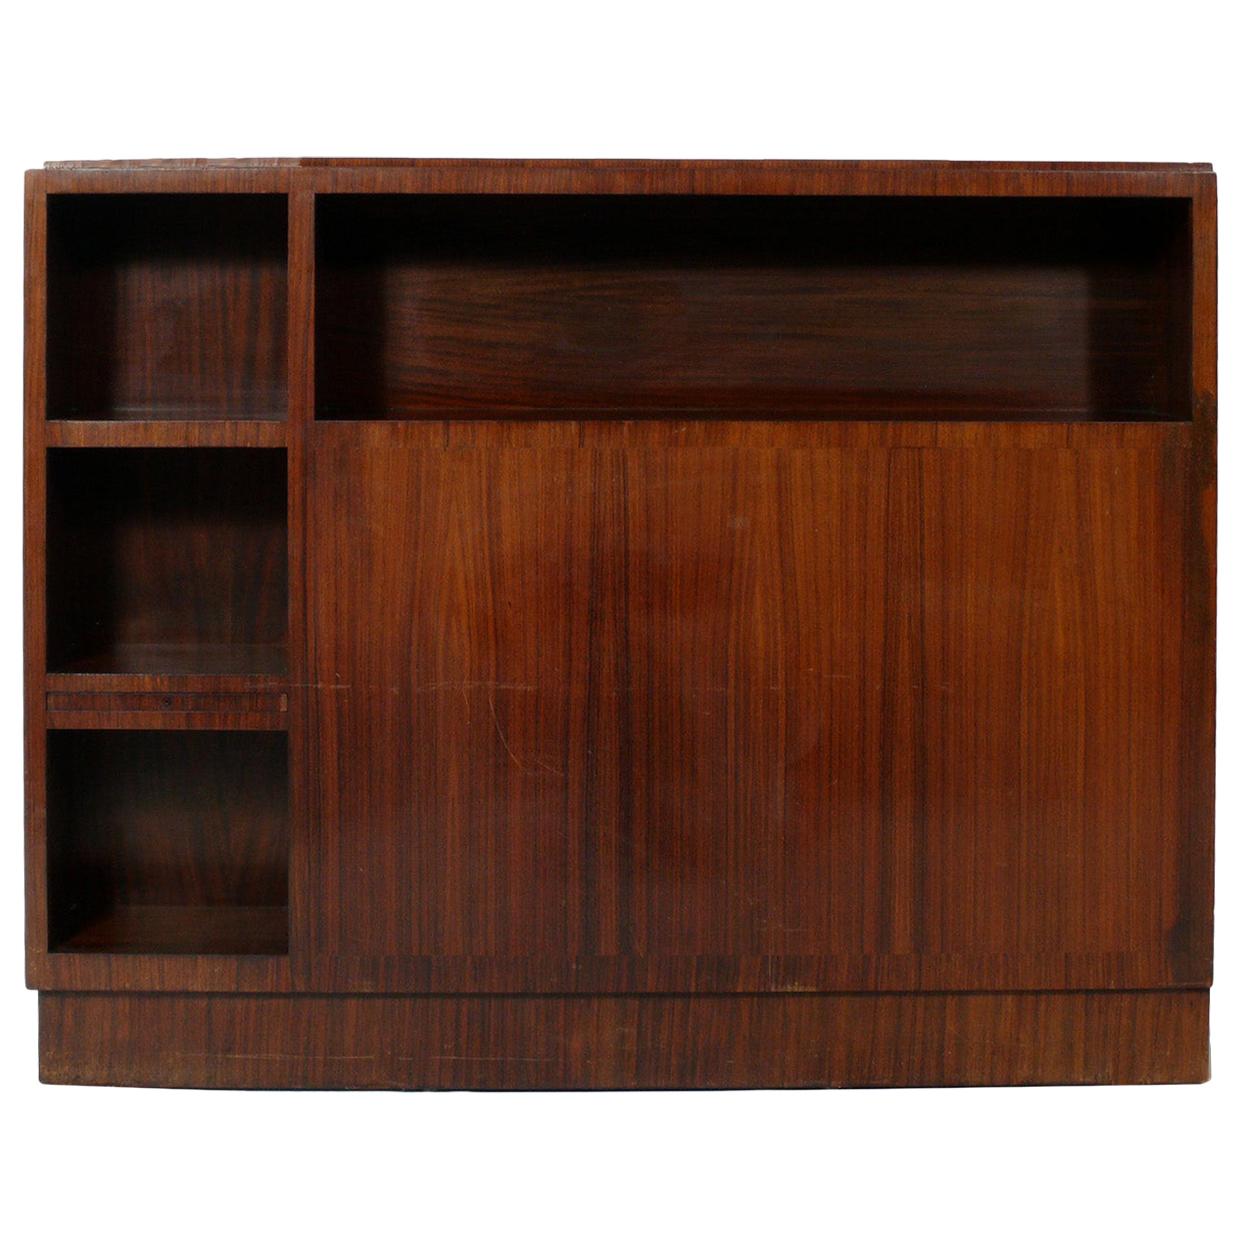 French Art Deco Rosewood Headboard or Bookcase For Sale